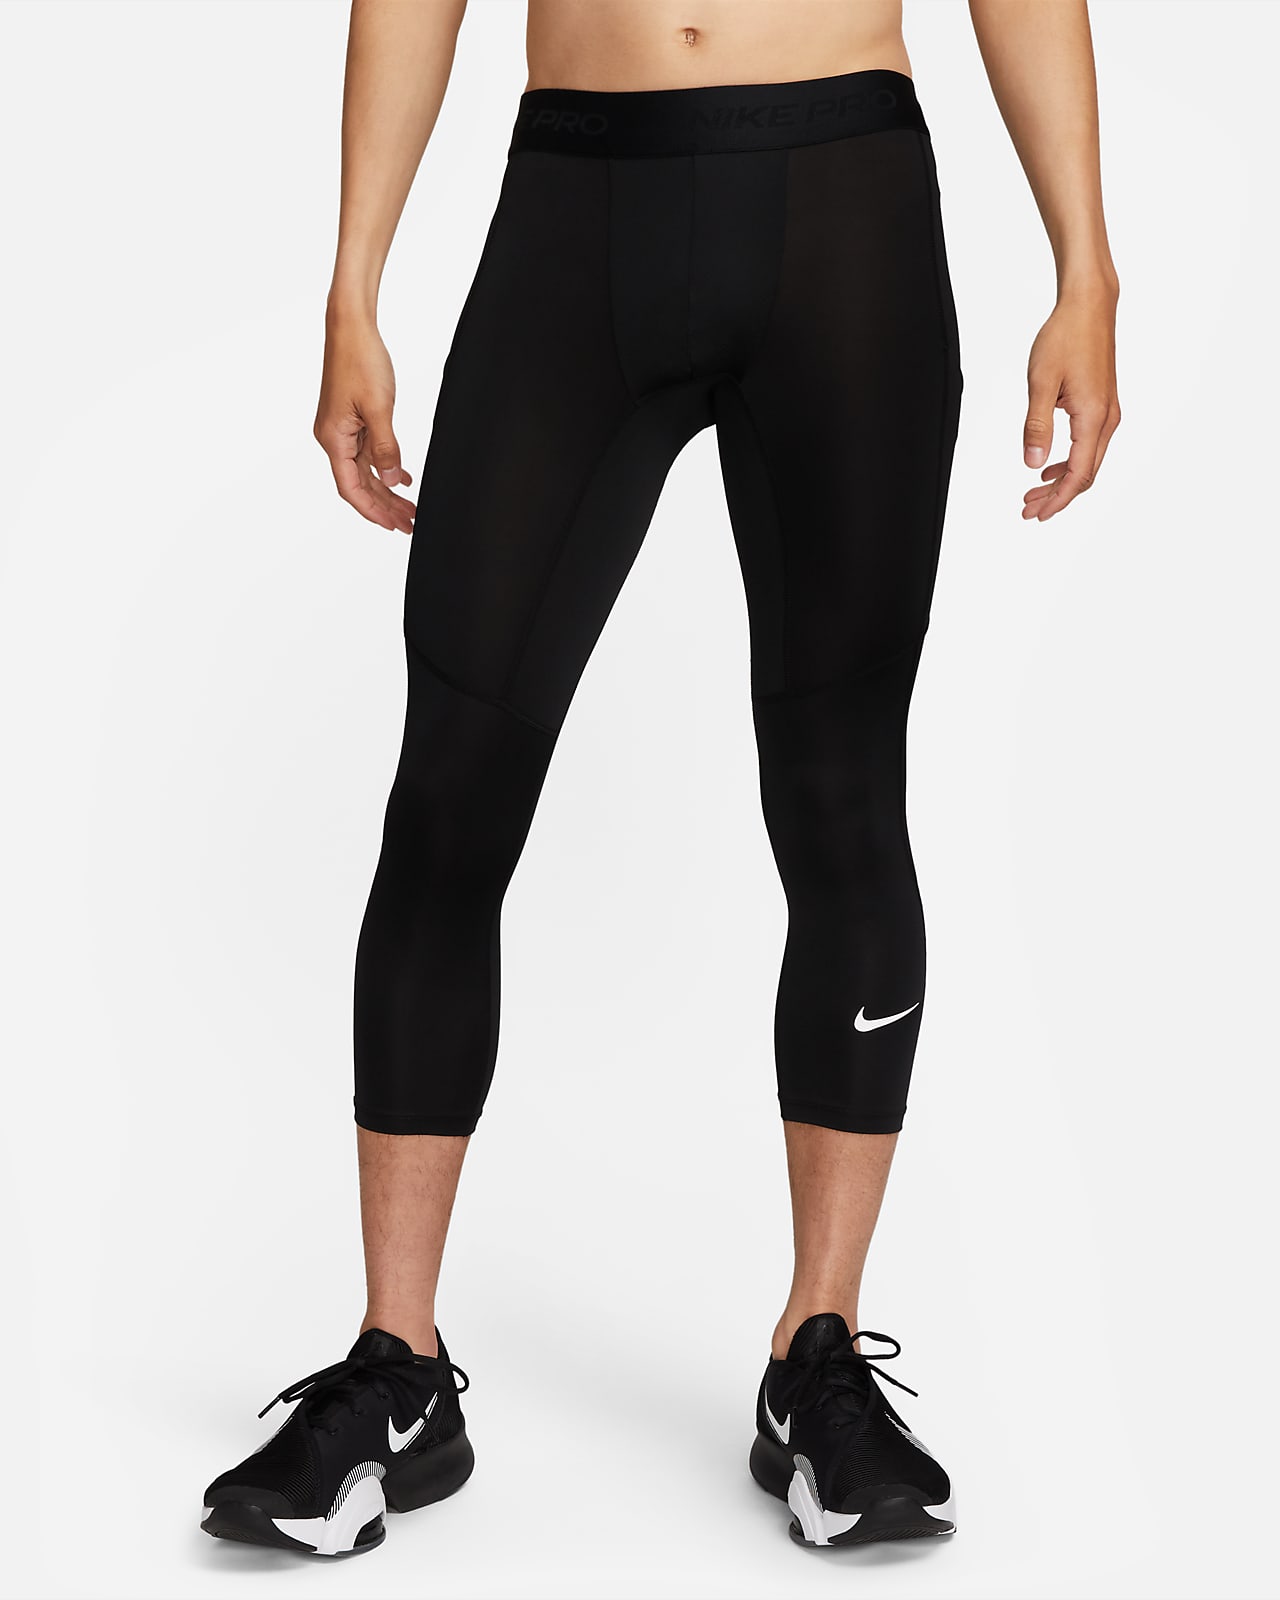 NIKE 3/4 Length (Black) Compression Cool Dry Sports Tights Pants Baselyer Running  Leggings Basketball Yoga Men and Women